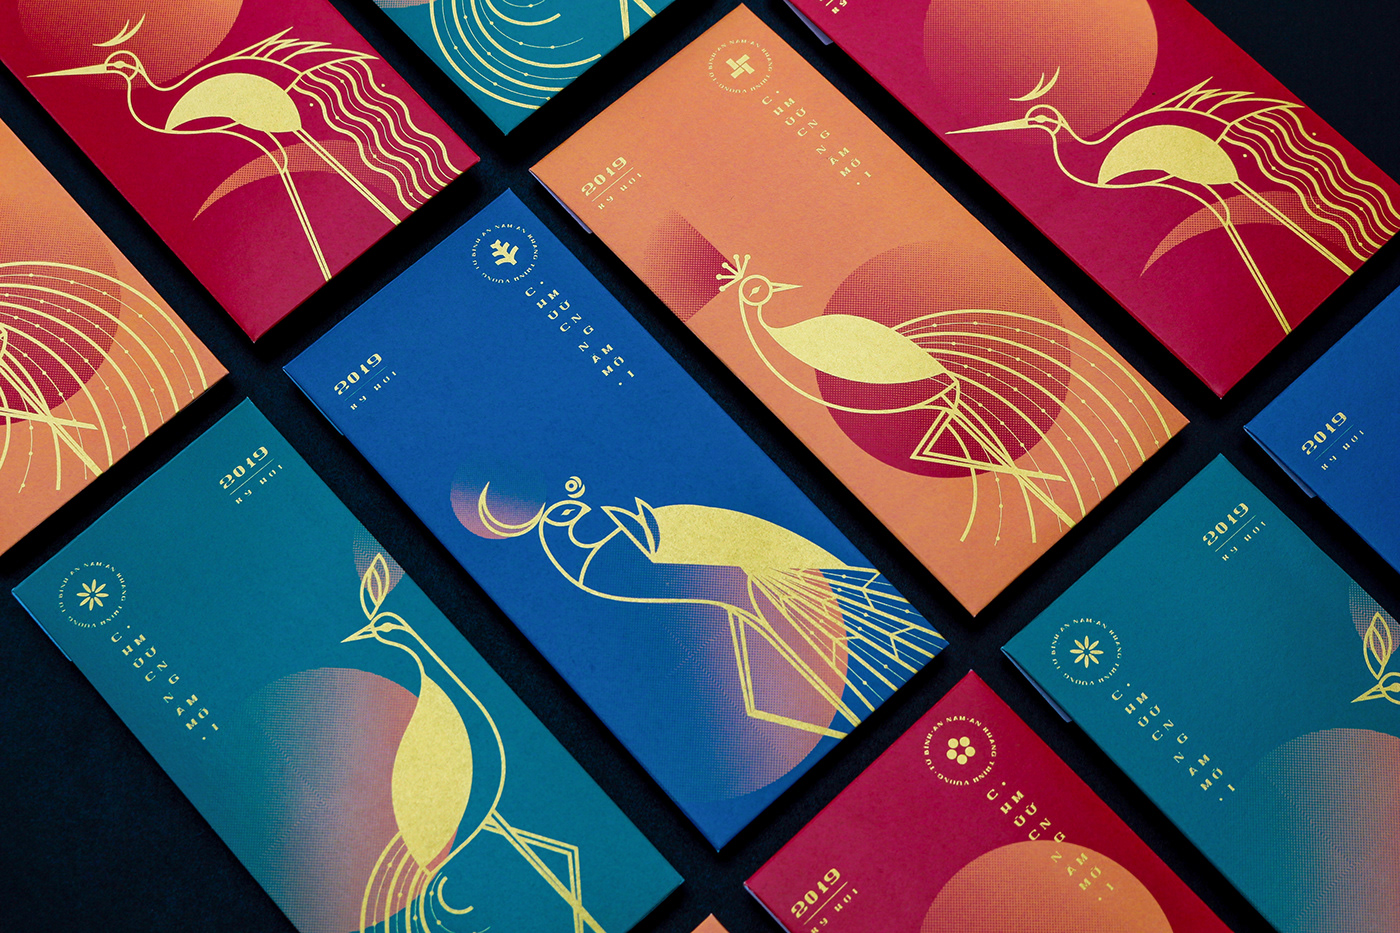 A HEALTHY NEW YEAR - Tet Red Envelope Collection 2021 on Behance